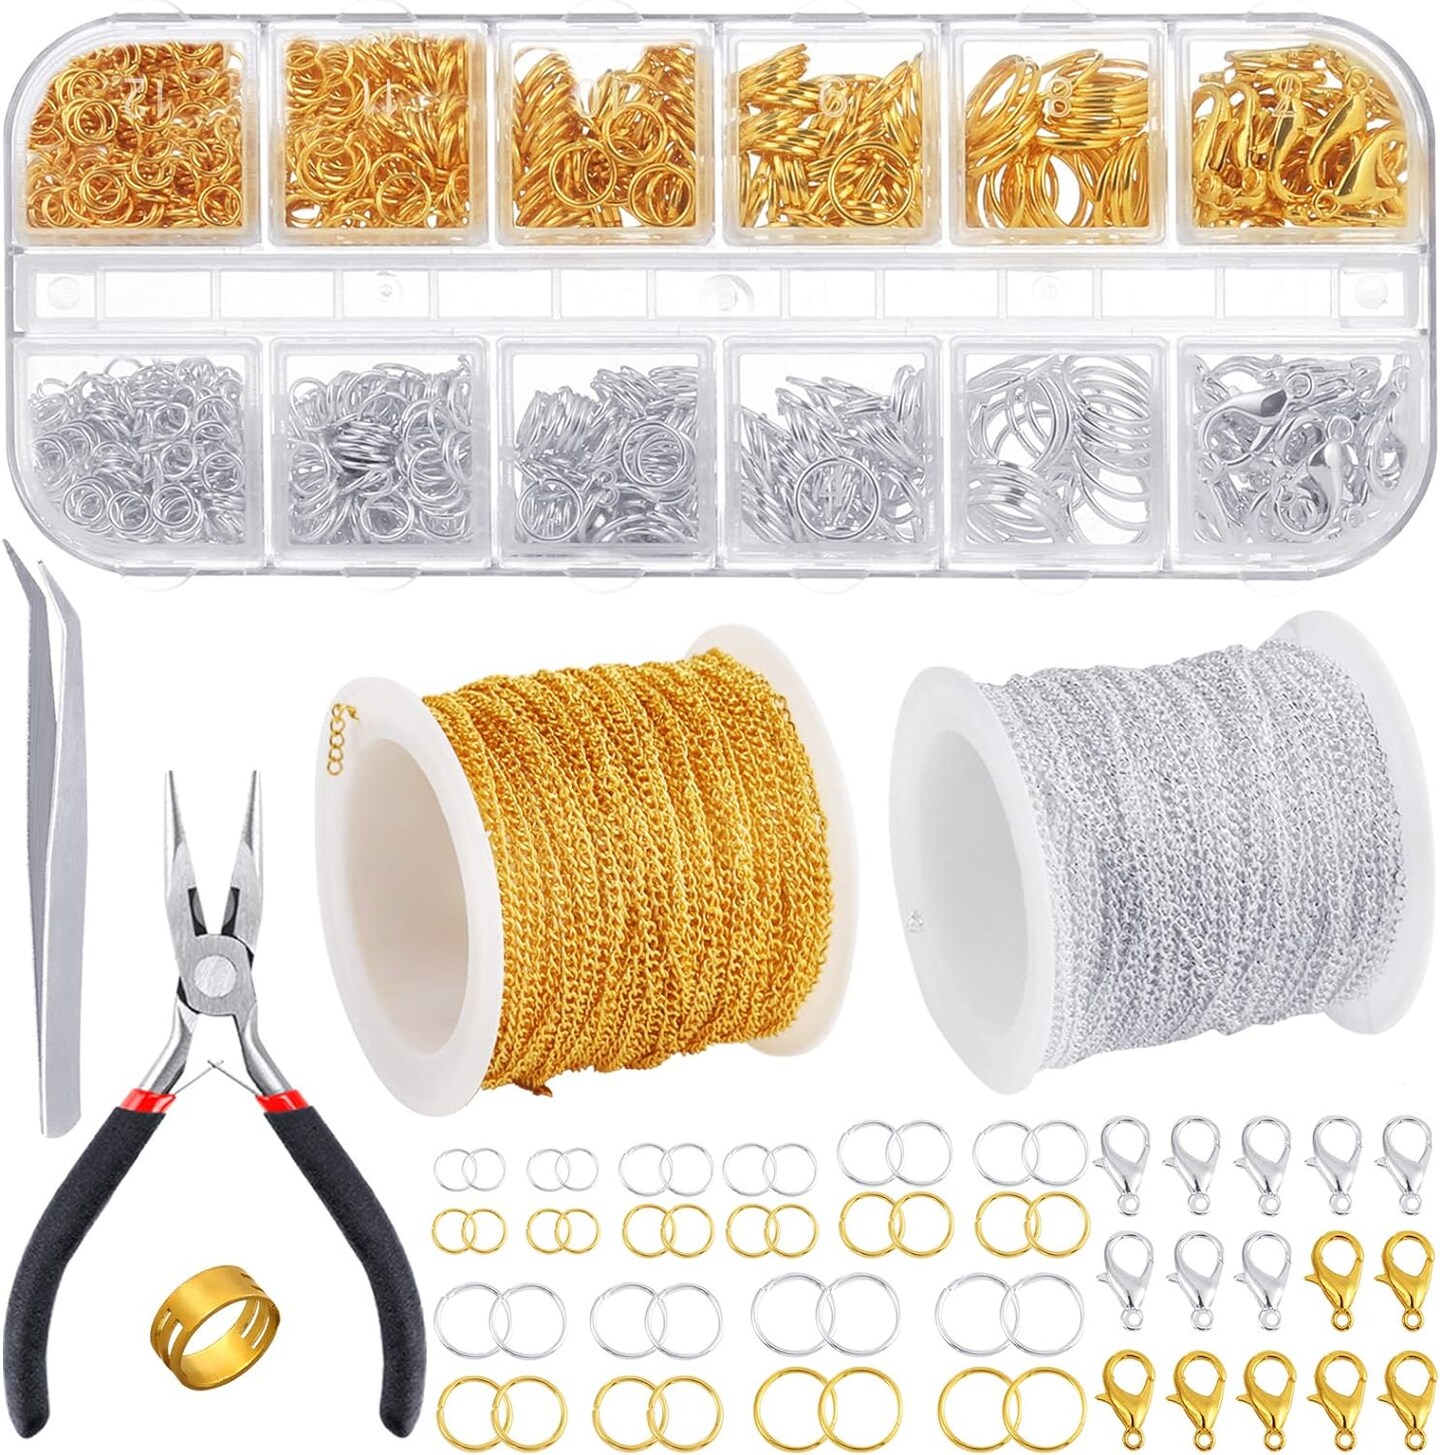 65 Feet Jewelry Chains Necklace Chains 2 mm Jewelry Making Chains with 960 Pieces Jump Rings 40 Pieces Lobster Clasps Jewelry Making Tools (Gold, Silver Total in 65 Feet)